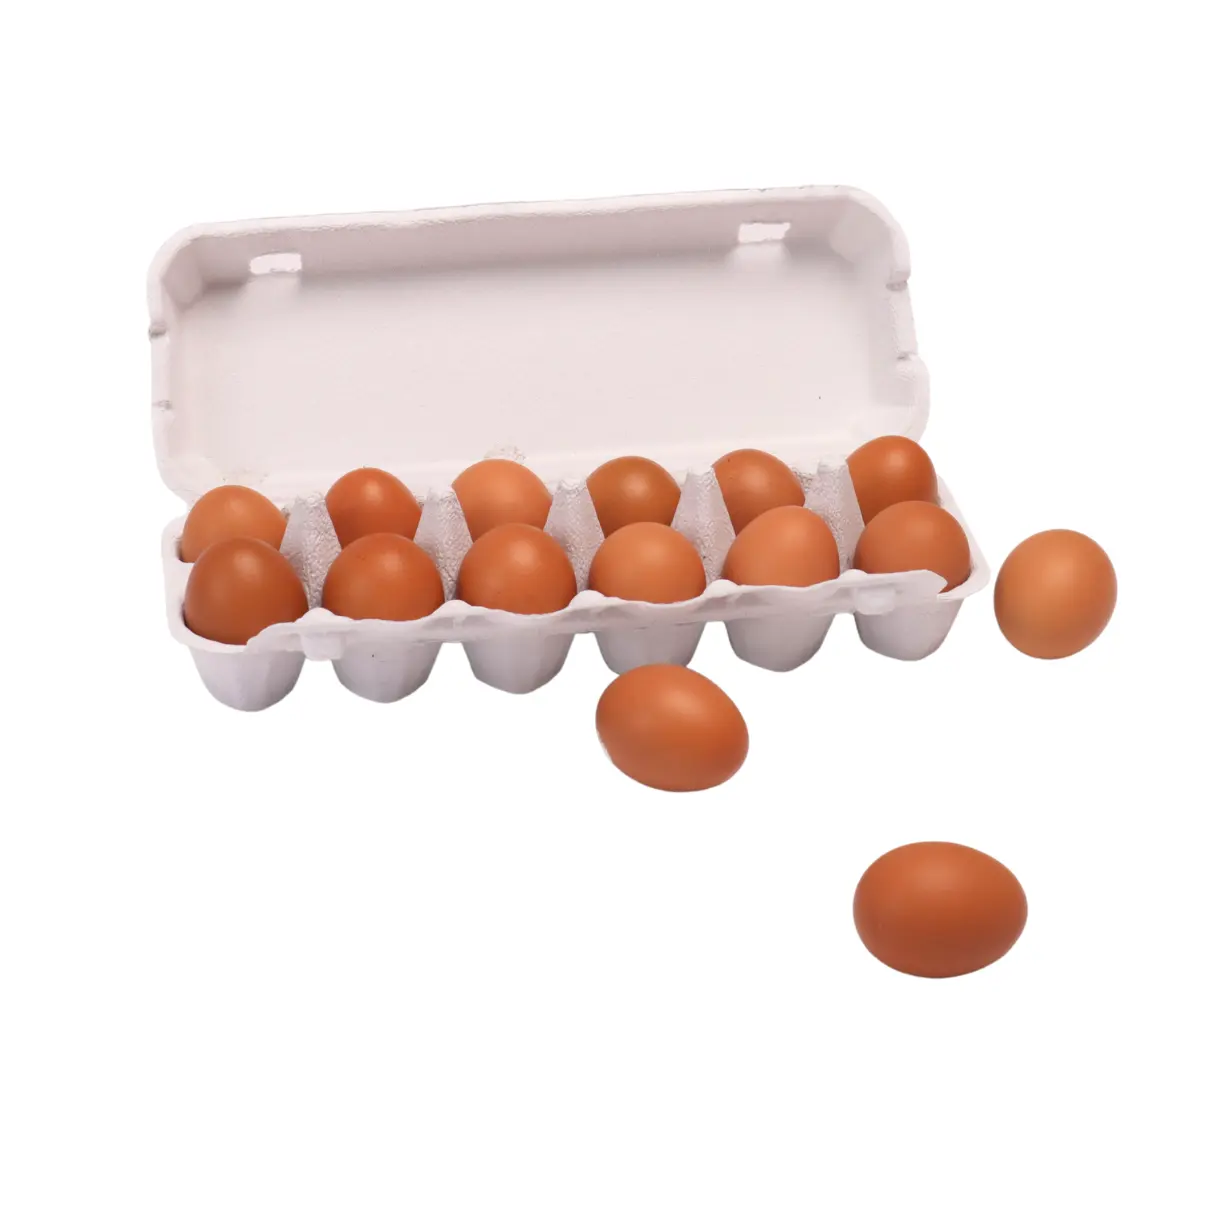 Good Quality 12 Eggs Carton Box Dimensions Box Made by Bio Degradable Paper Pulp Egg Box Egg tray made in Viet Nam Manufacturer